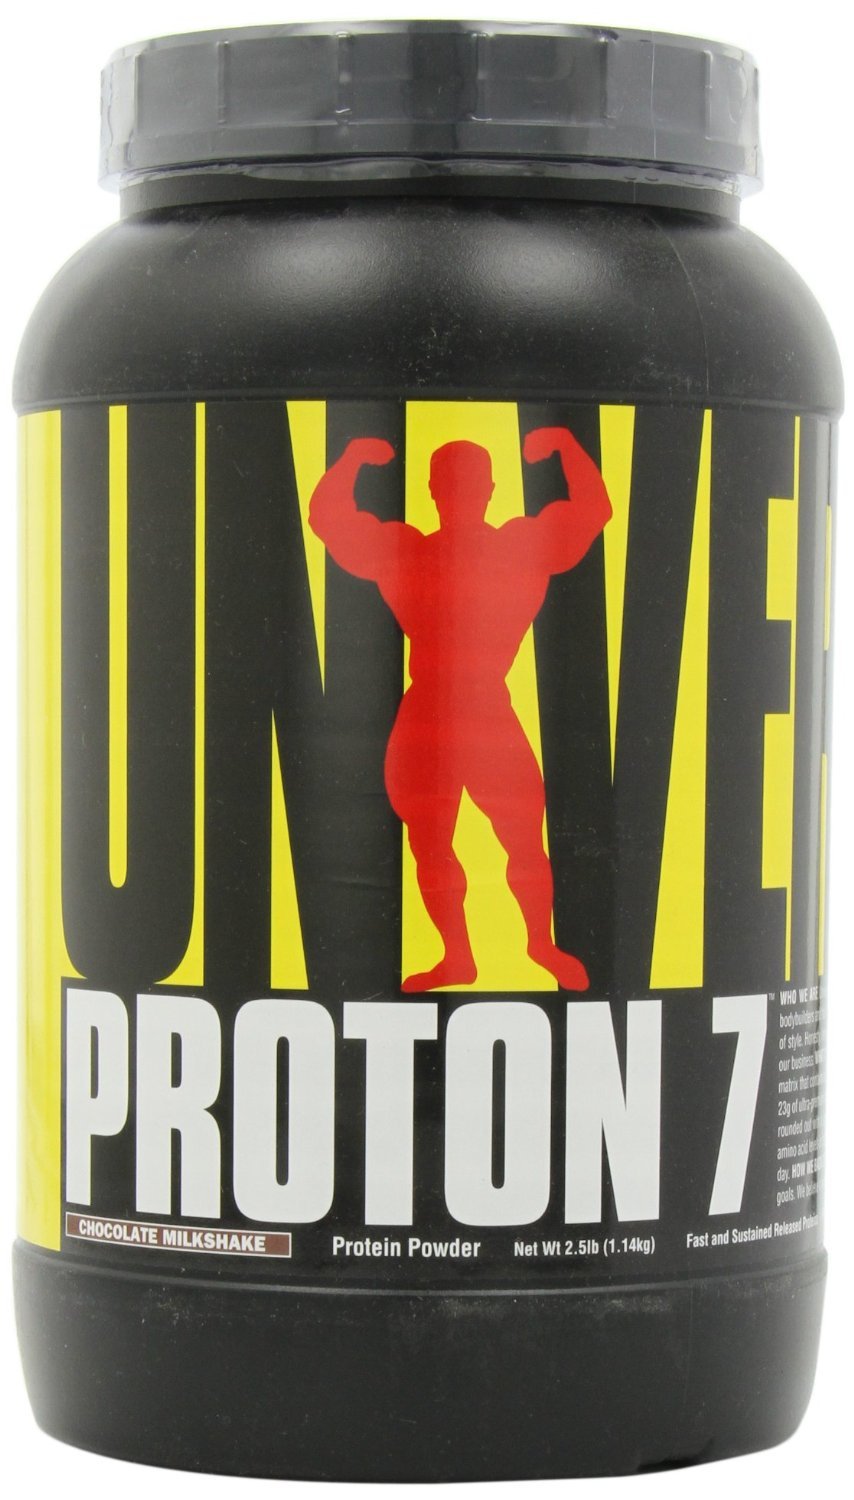 Proton 7, 1140 g, Universal Nutrition. Whey Protein Blend. 